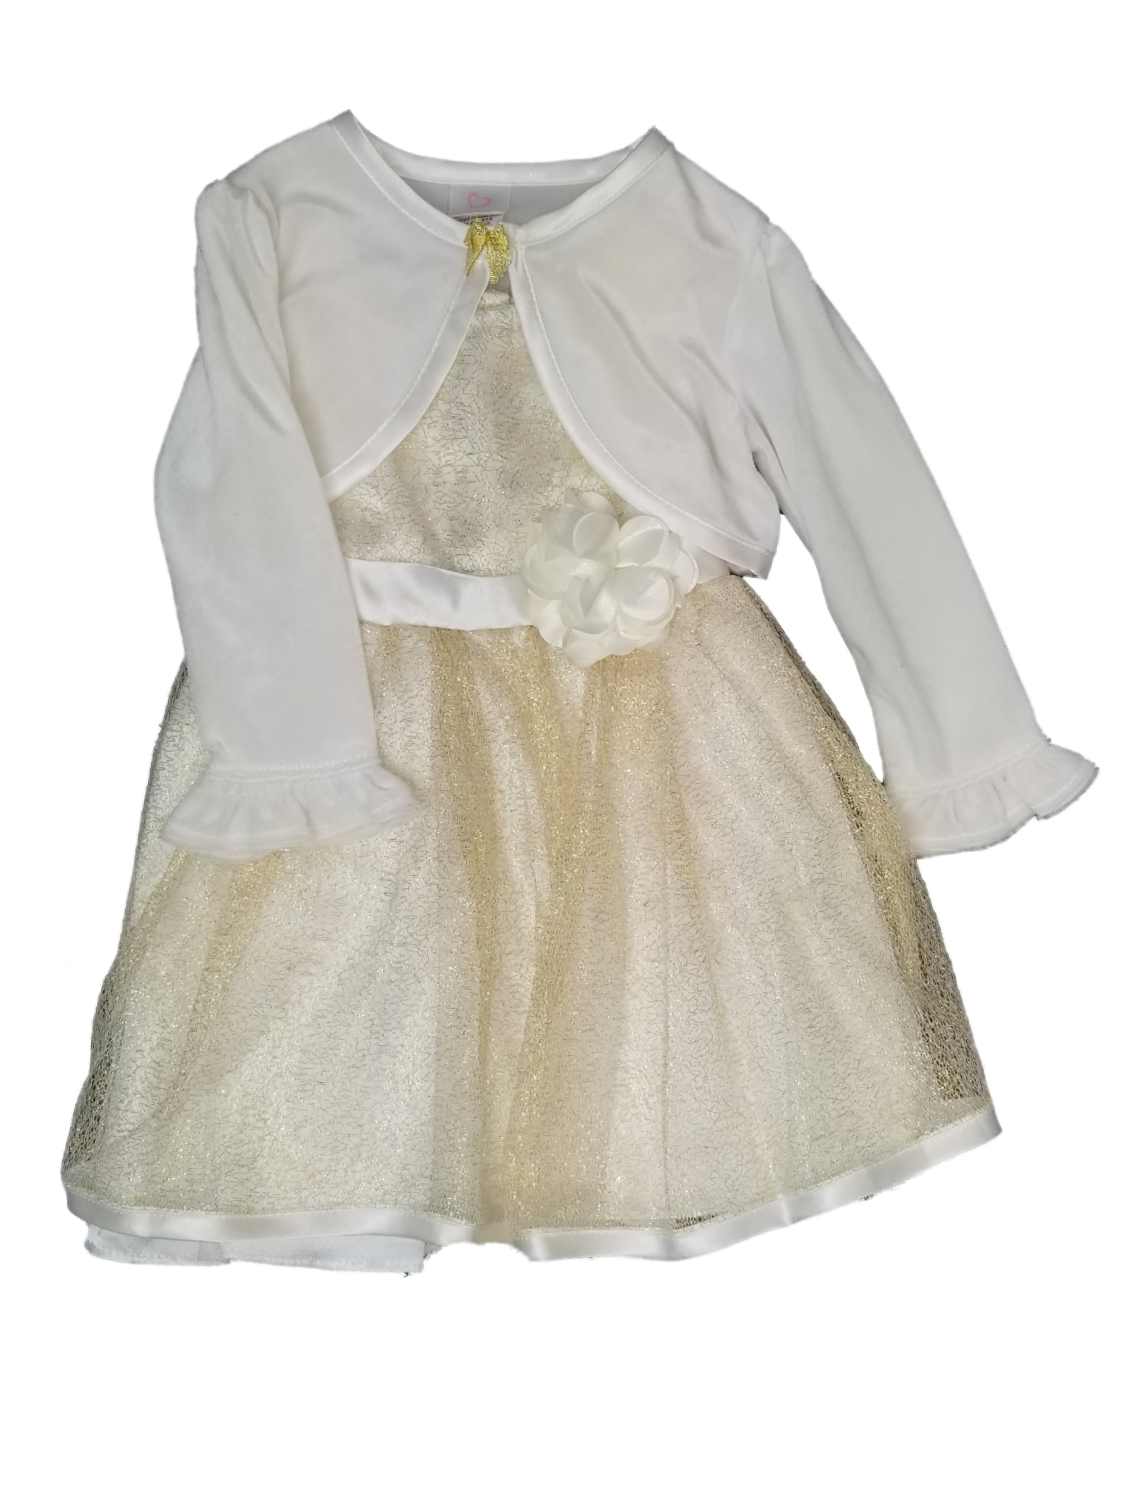 Youngland Infant Toddler White Gold Tulle Fancy Christmas Holiday Party Dress Cardigan 18M